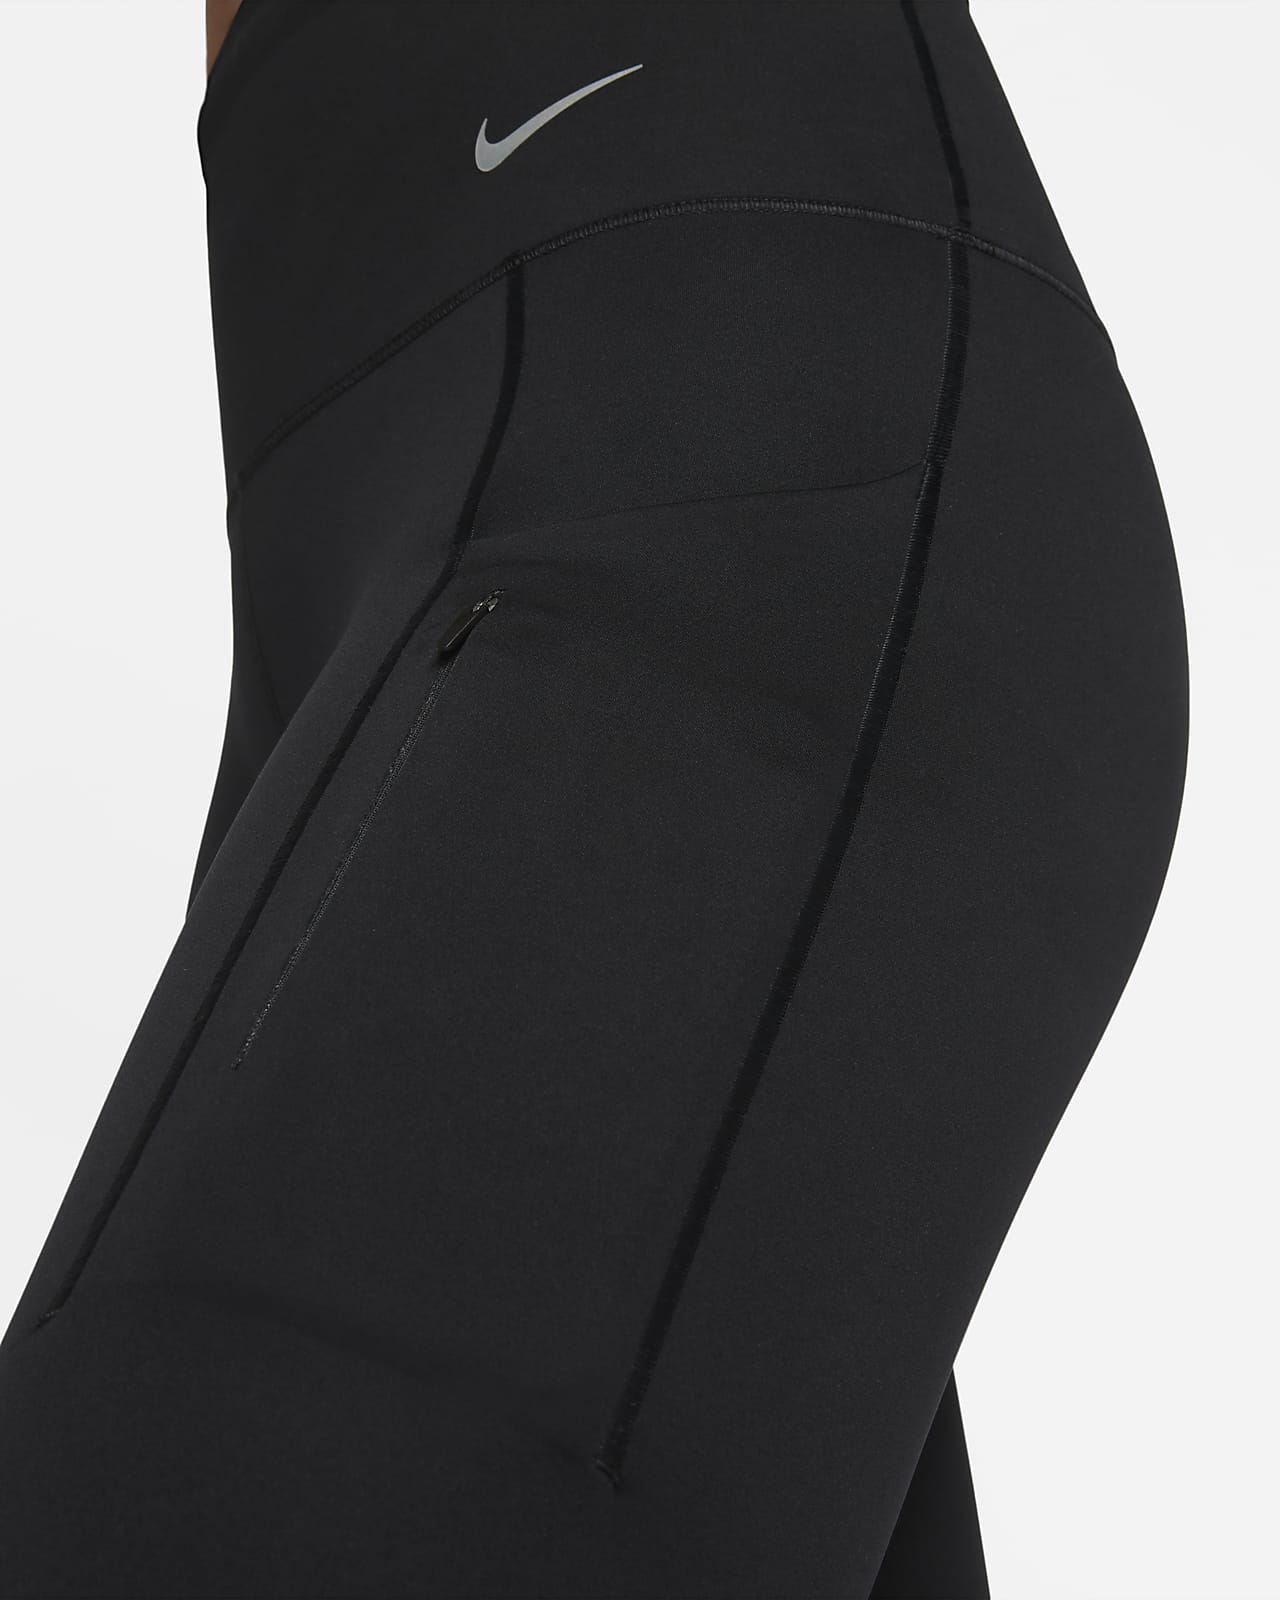 Nike Go Women's Firm-Support High-Waisted Leggings with Pockets. Nike LU